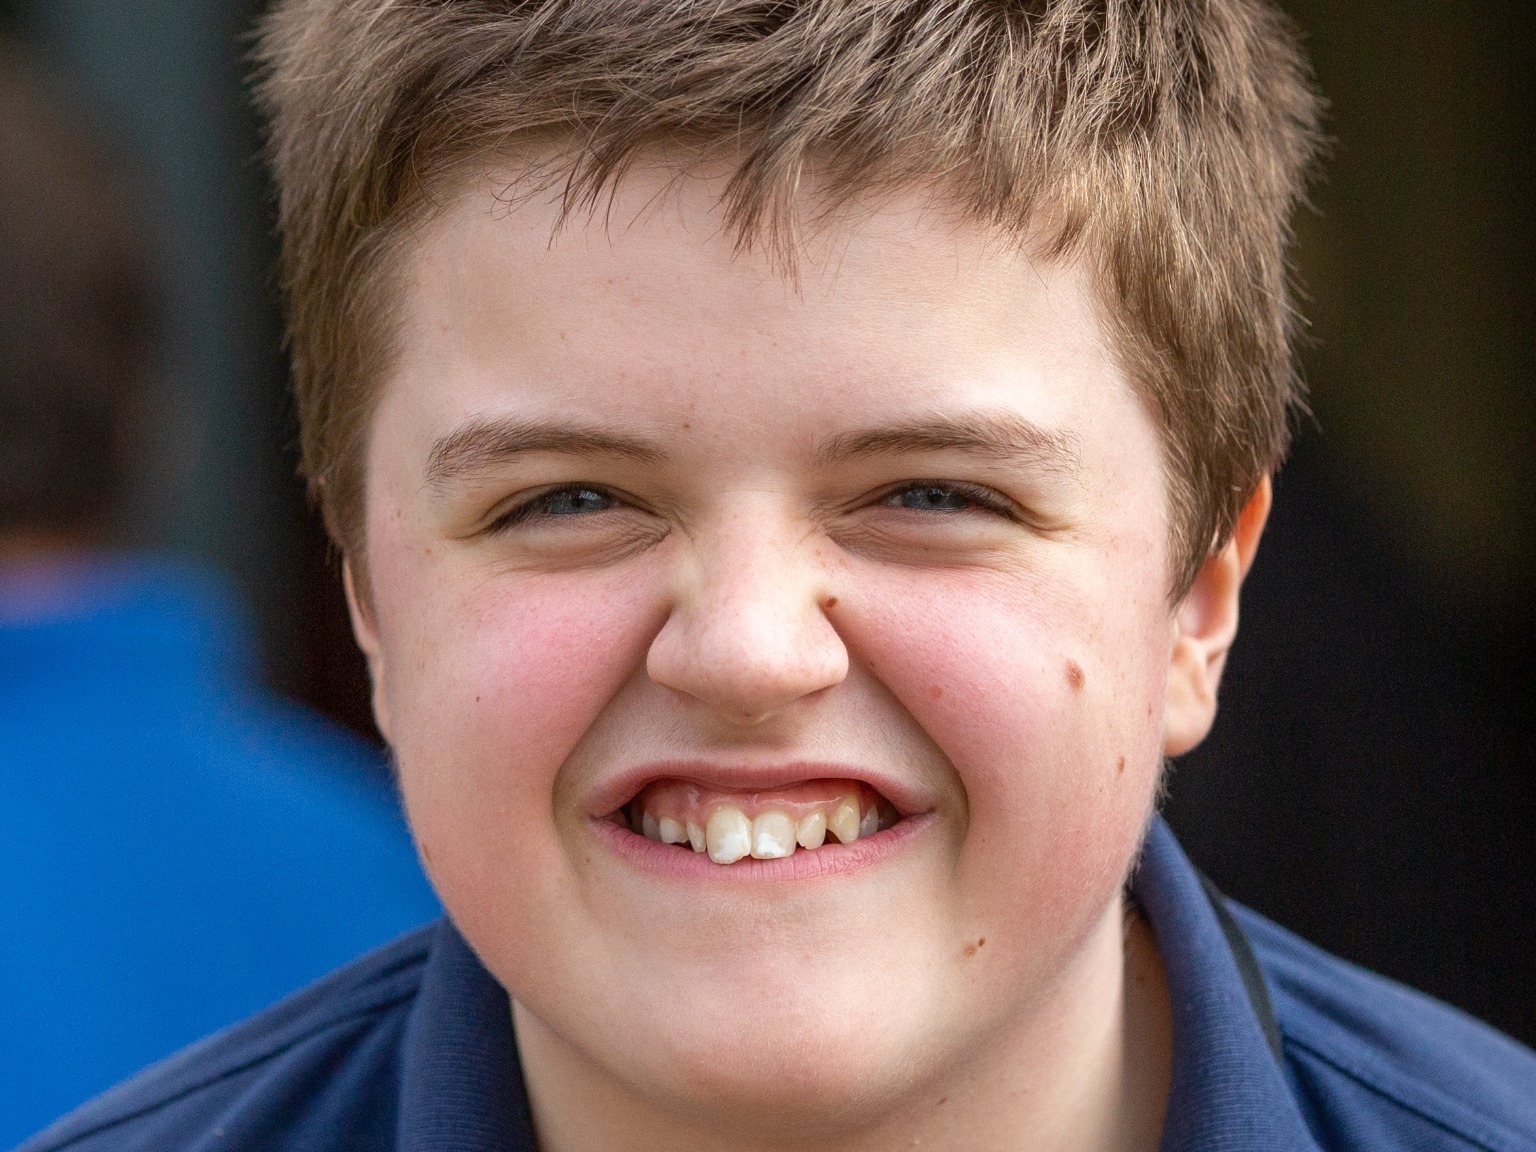 Teenage boy with a disability school photograph